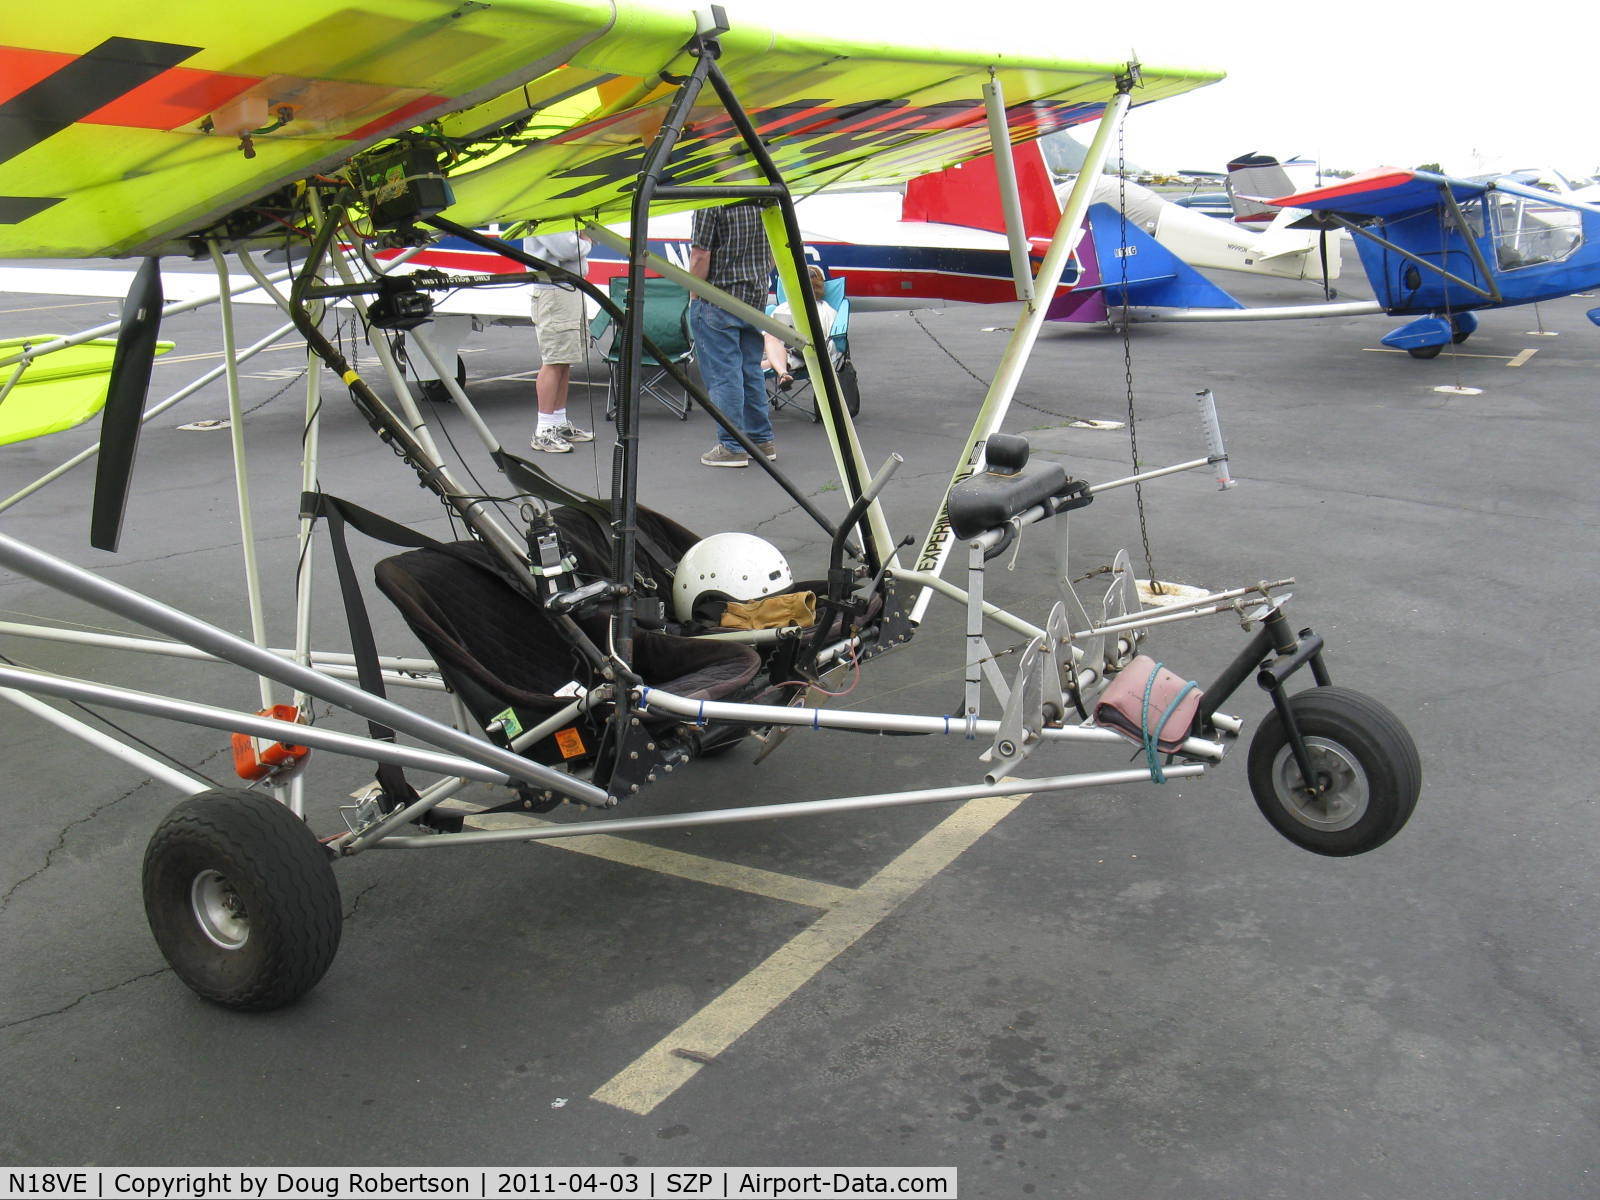 N18VE, 2003 M-Squared Breese 2 C/N 000550, 2003 M-squared BREESE 2 Ultralight trainer, Rotax 503 DCDI 2 cylinder two stroke 52 Hp pusher engine, side by side dual control registered Experimental Ultralight